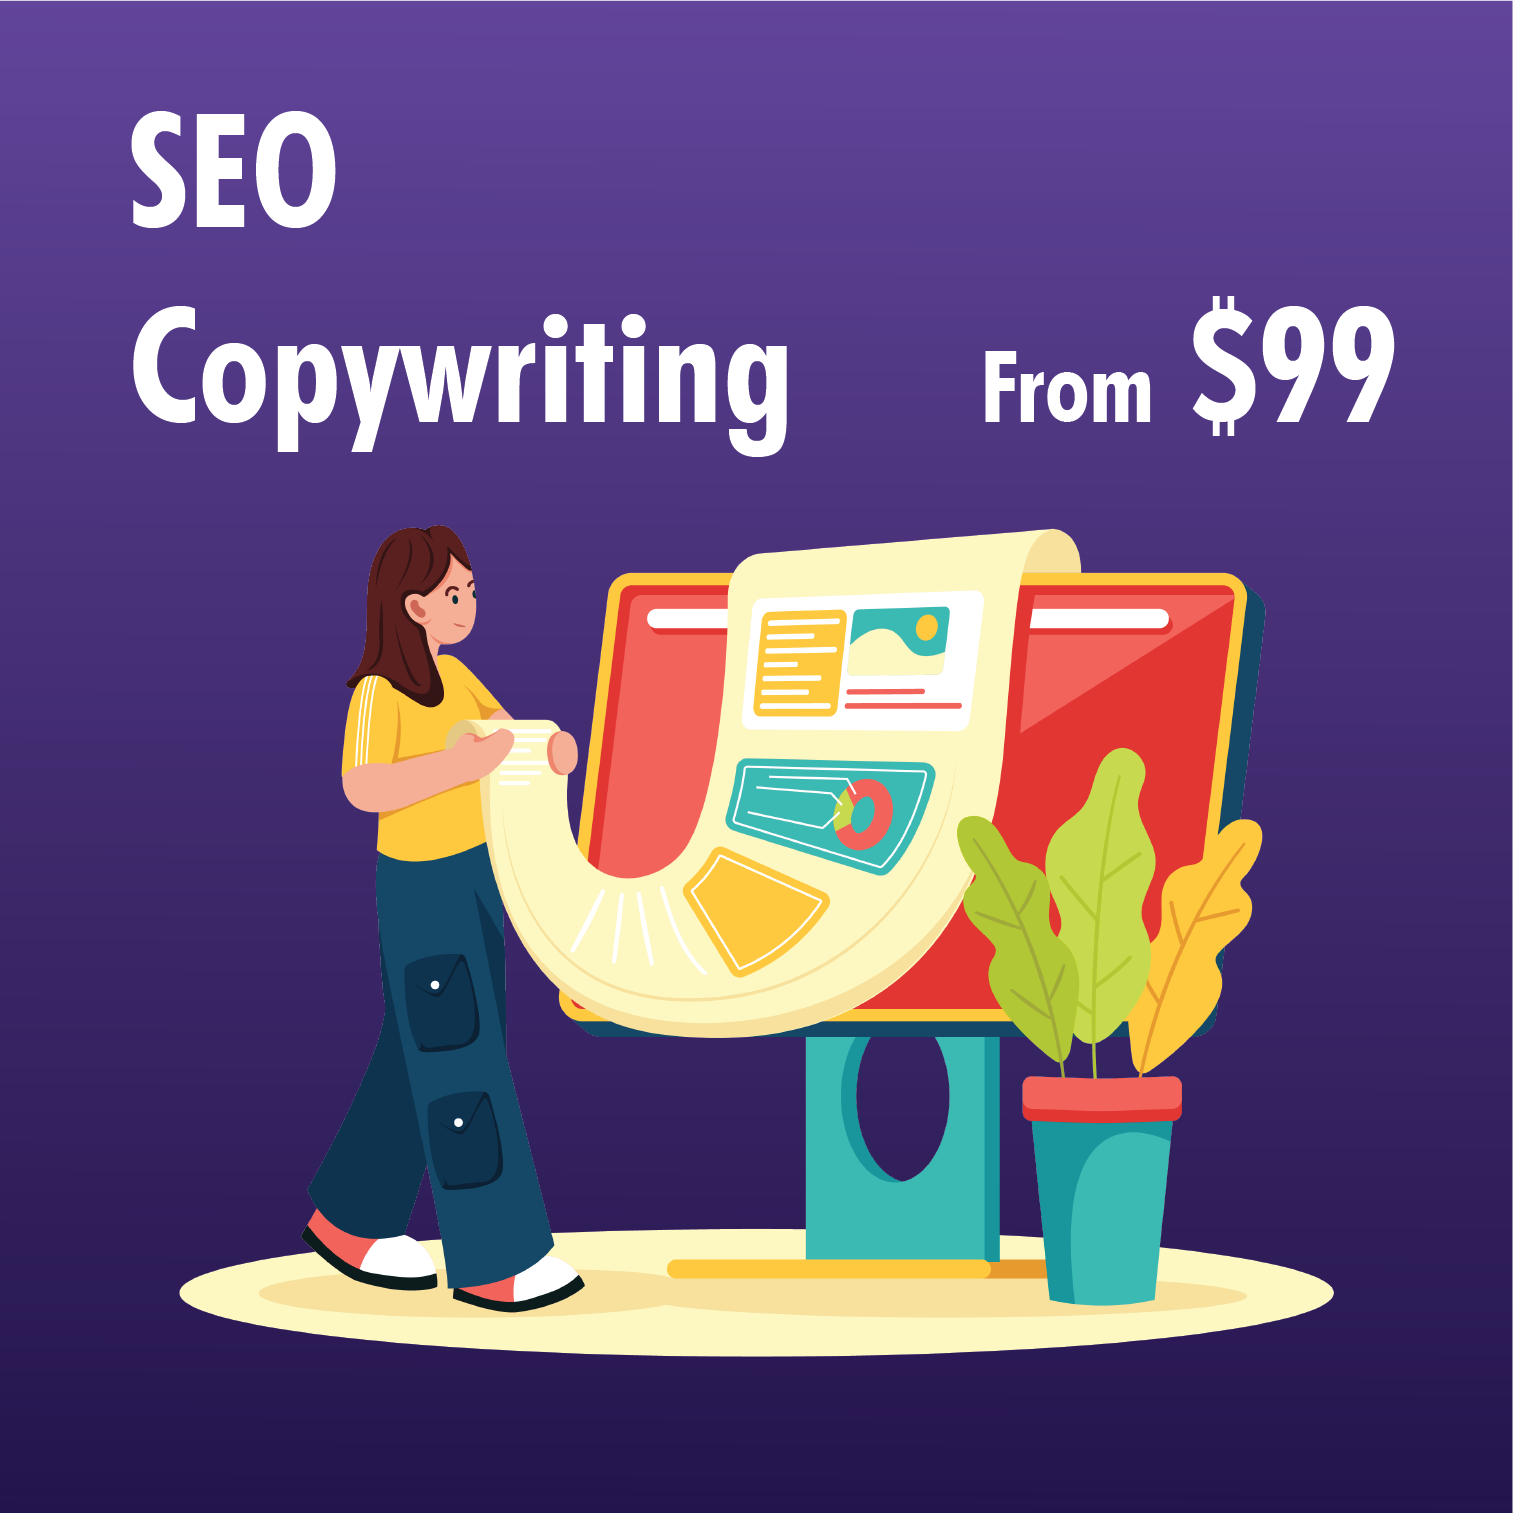 Hire The Best SEO Copywriting Services